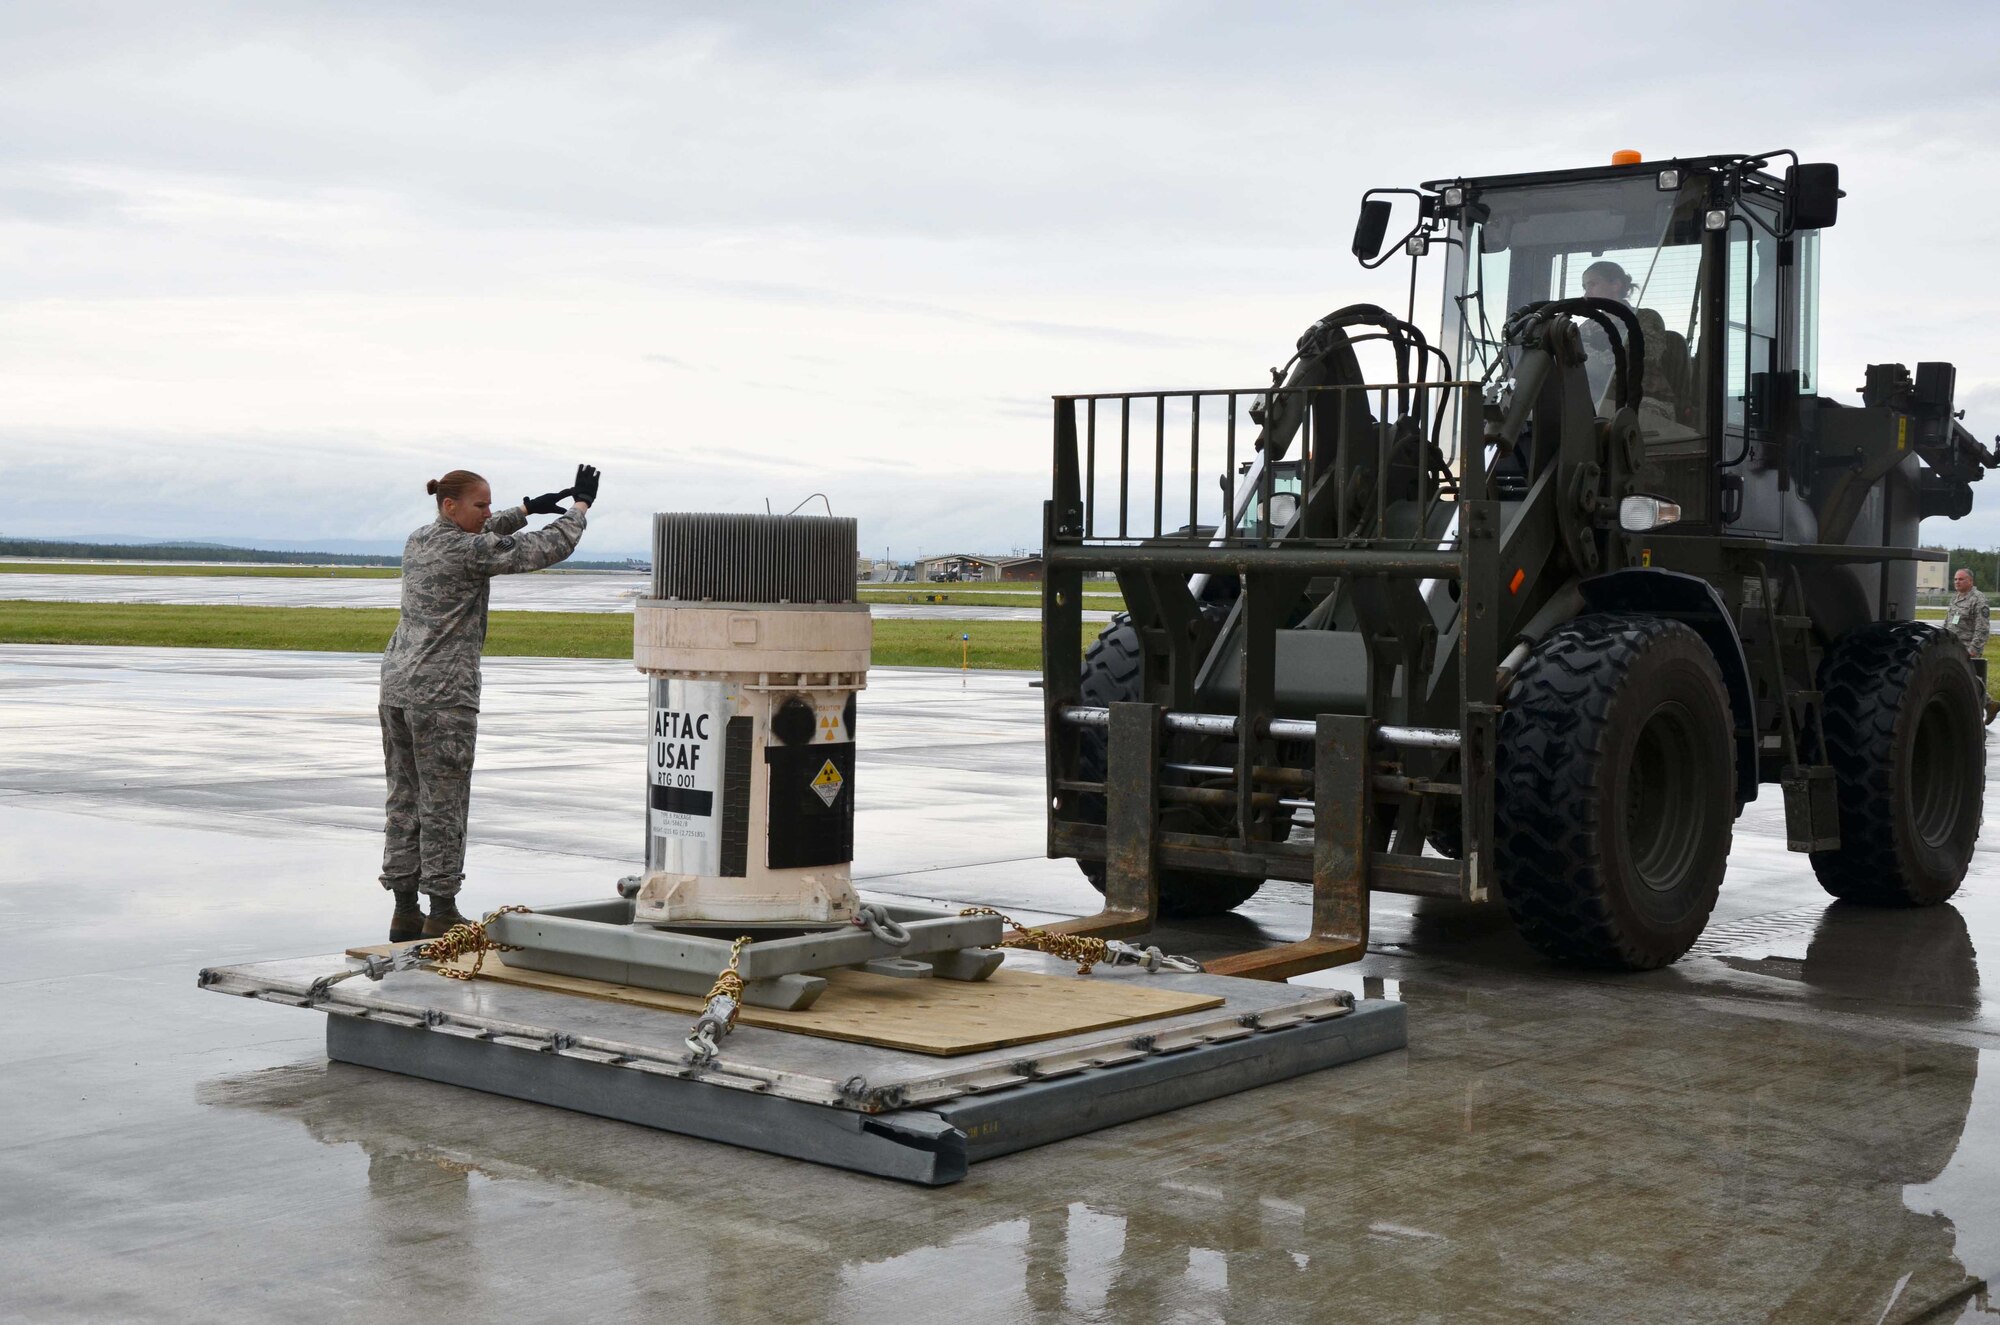 Tech. Sgt. Rebecca Morin, 354th Logistics Readiness Squadaron noncommissioned officer in charge of air terminal operations at Eielson AFB, Alaska, gives hand signals to forklift driver Staff Sgt. Rebecca Bartlett as Bartlett slowly places a pallet containing a radioisotope thermoelectric generator on the ground July 14, 2015.  Their efforts were part of the larger mission to remove the Air Force Technical Applications Center's 10 radiologic RTGs from Burnt Mountain to have them permanently disposed of at the Nevada National Security Site.  (U.S. Air Force photo by Susan A. Romano)